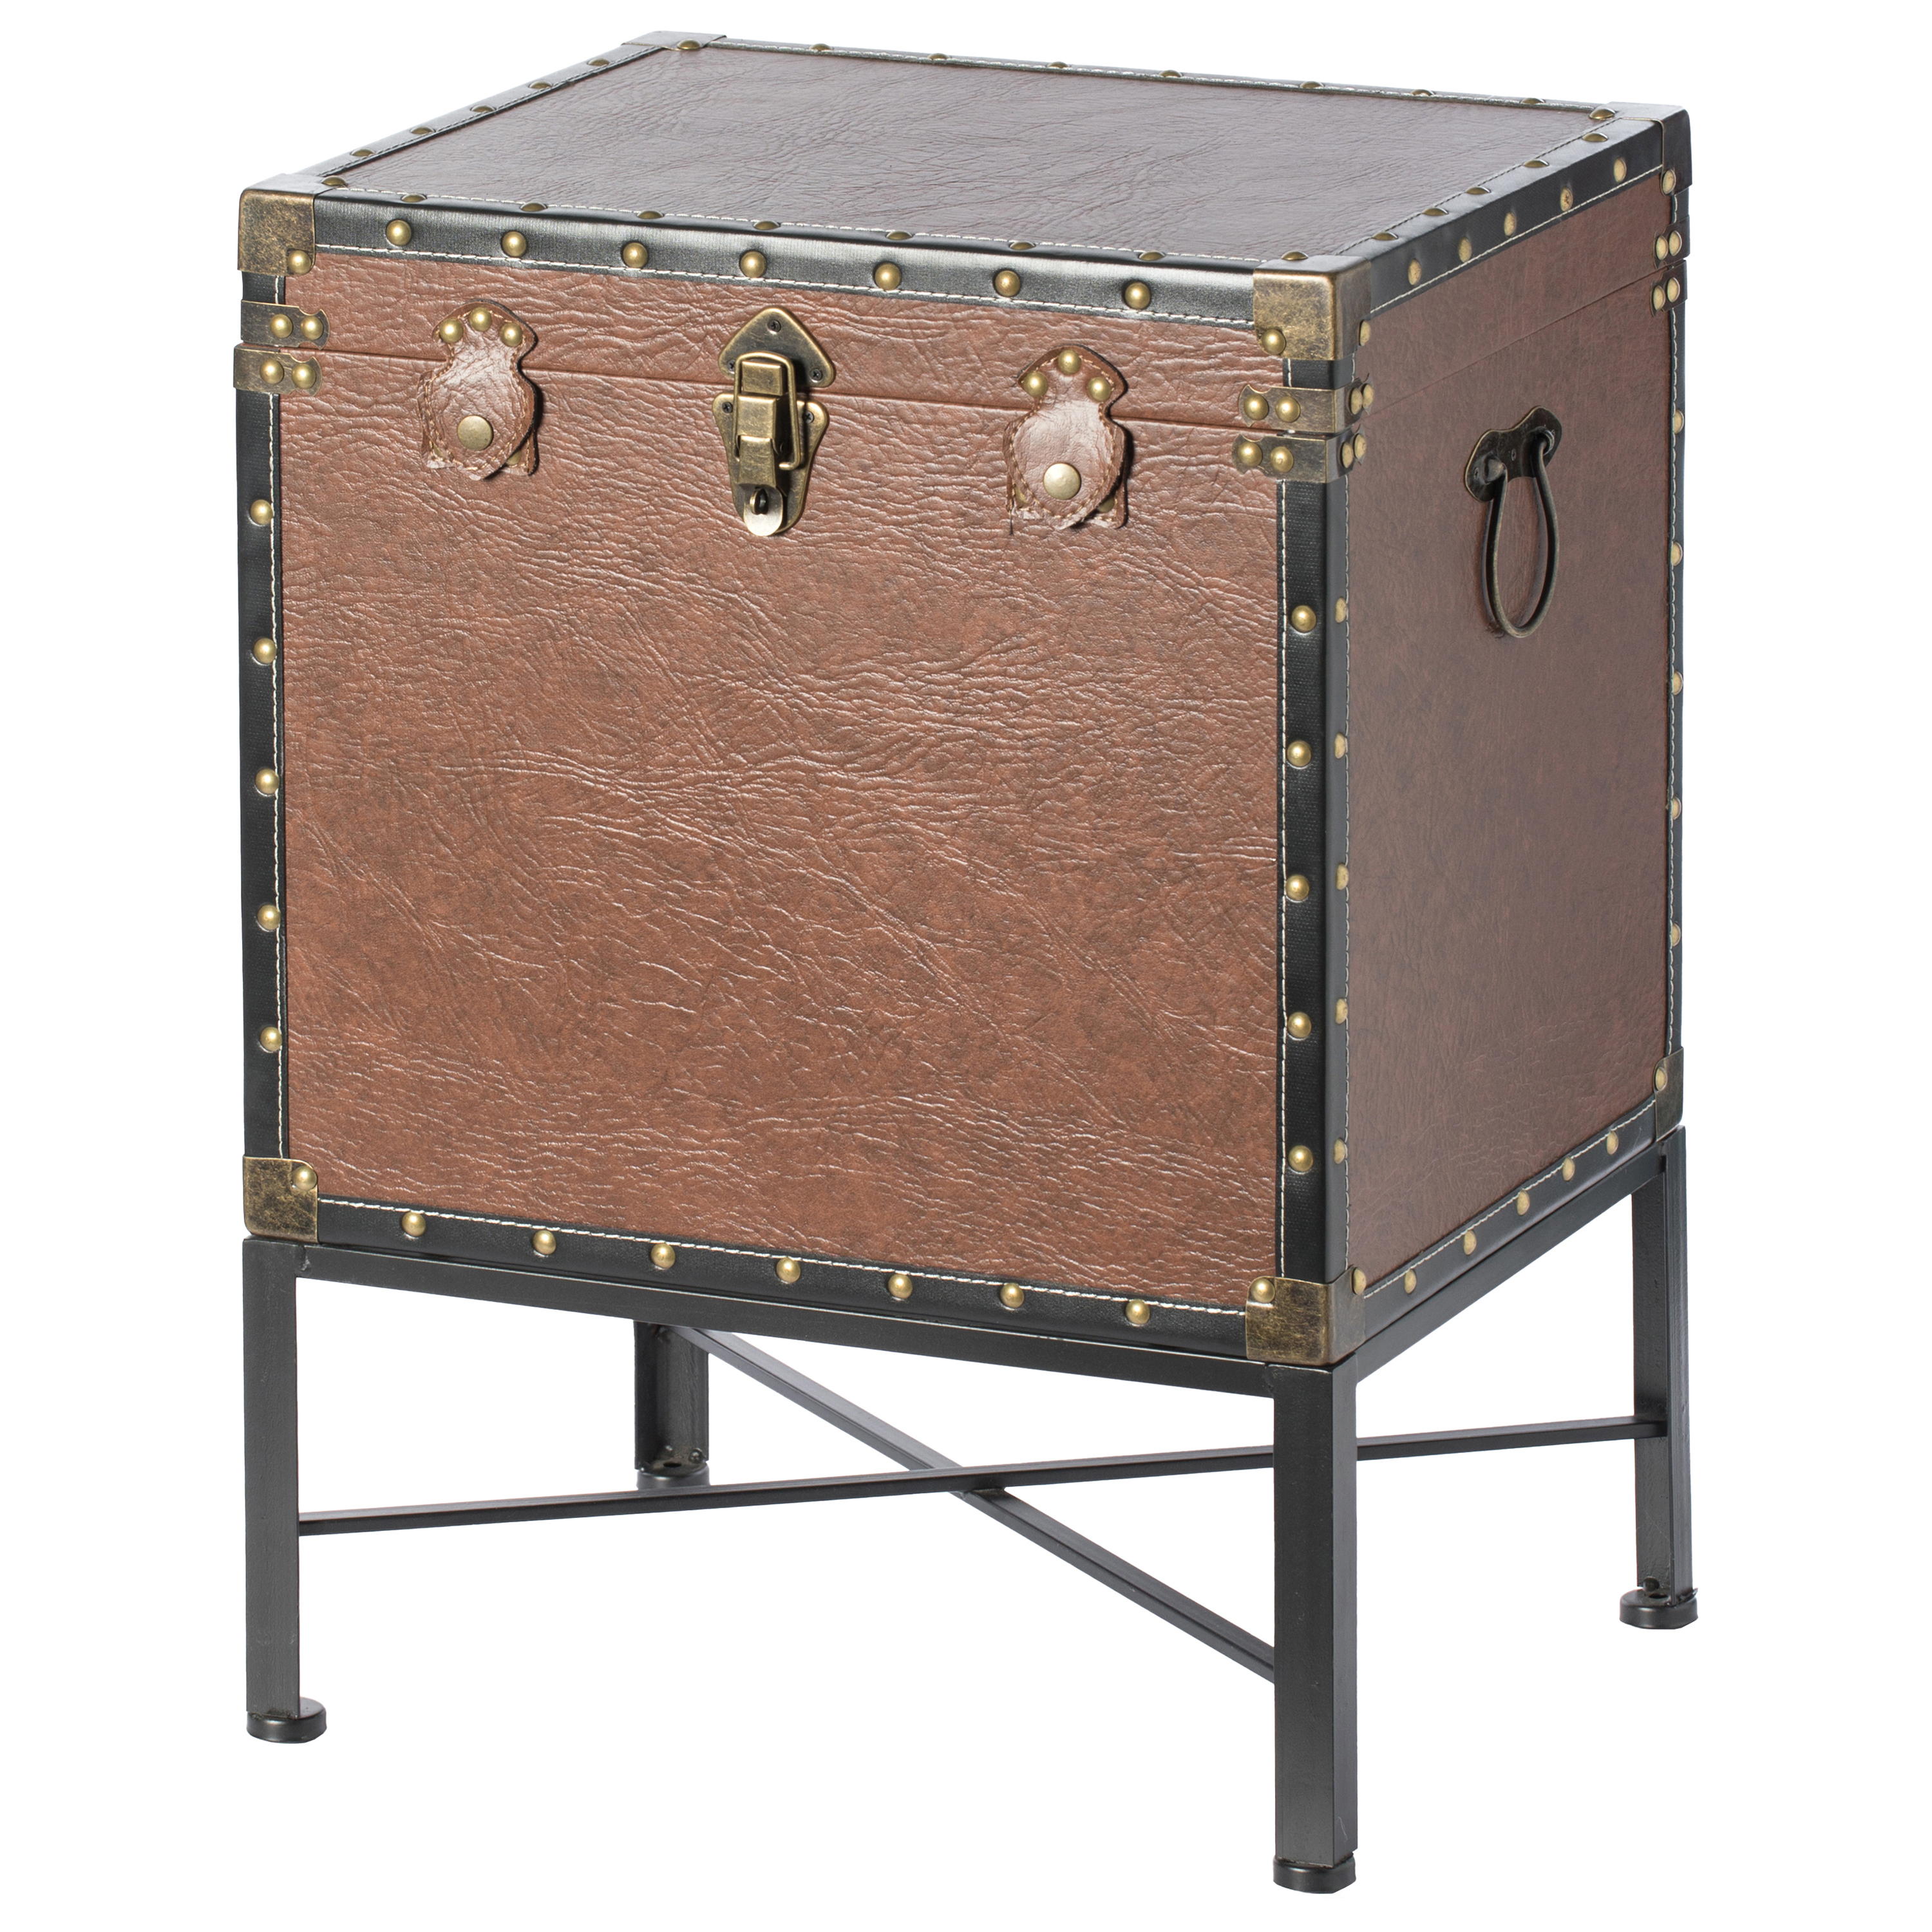 Faux Leather Trimmed Lockable Square Lined Storage Trunk, End Table On Metal Stand - Brown